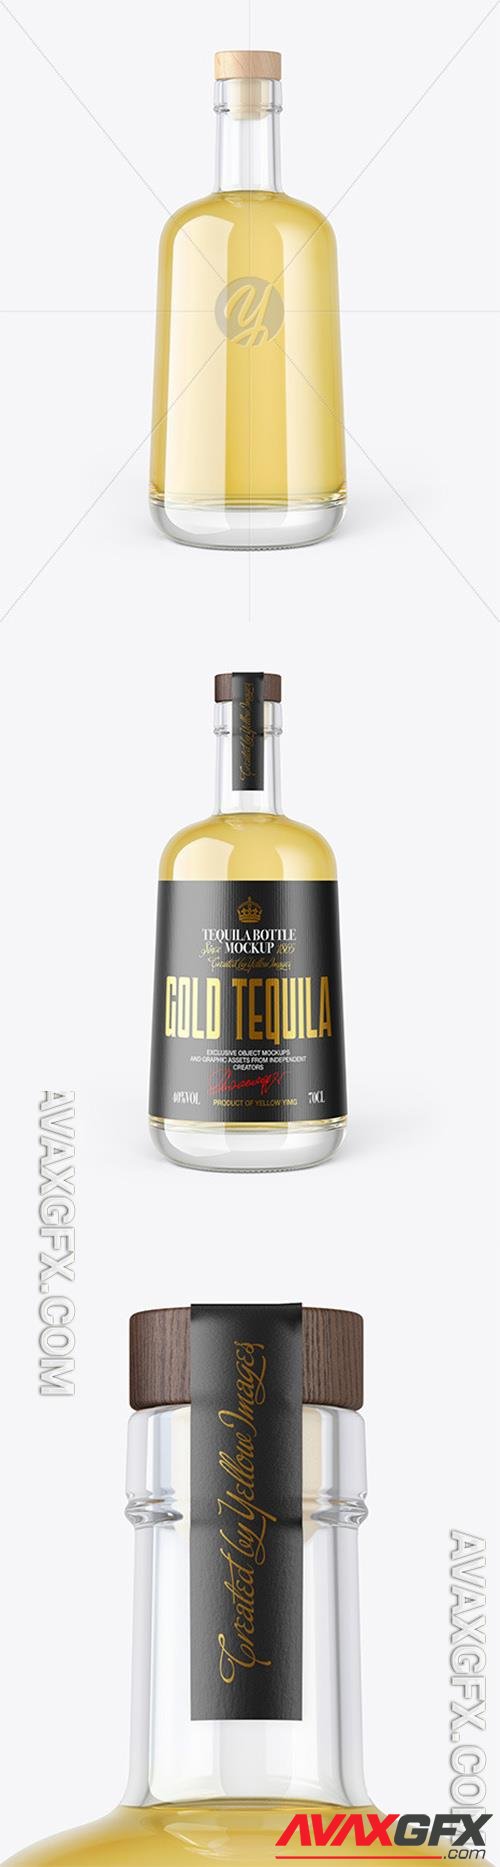 Gold Tequila Bottle with Wooden Cap Mockup 82695 TIF